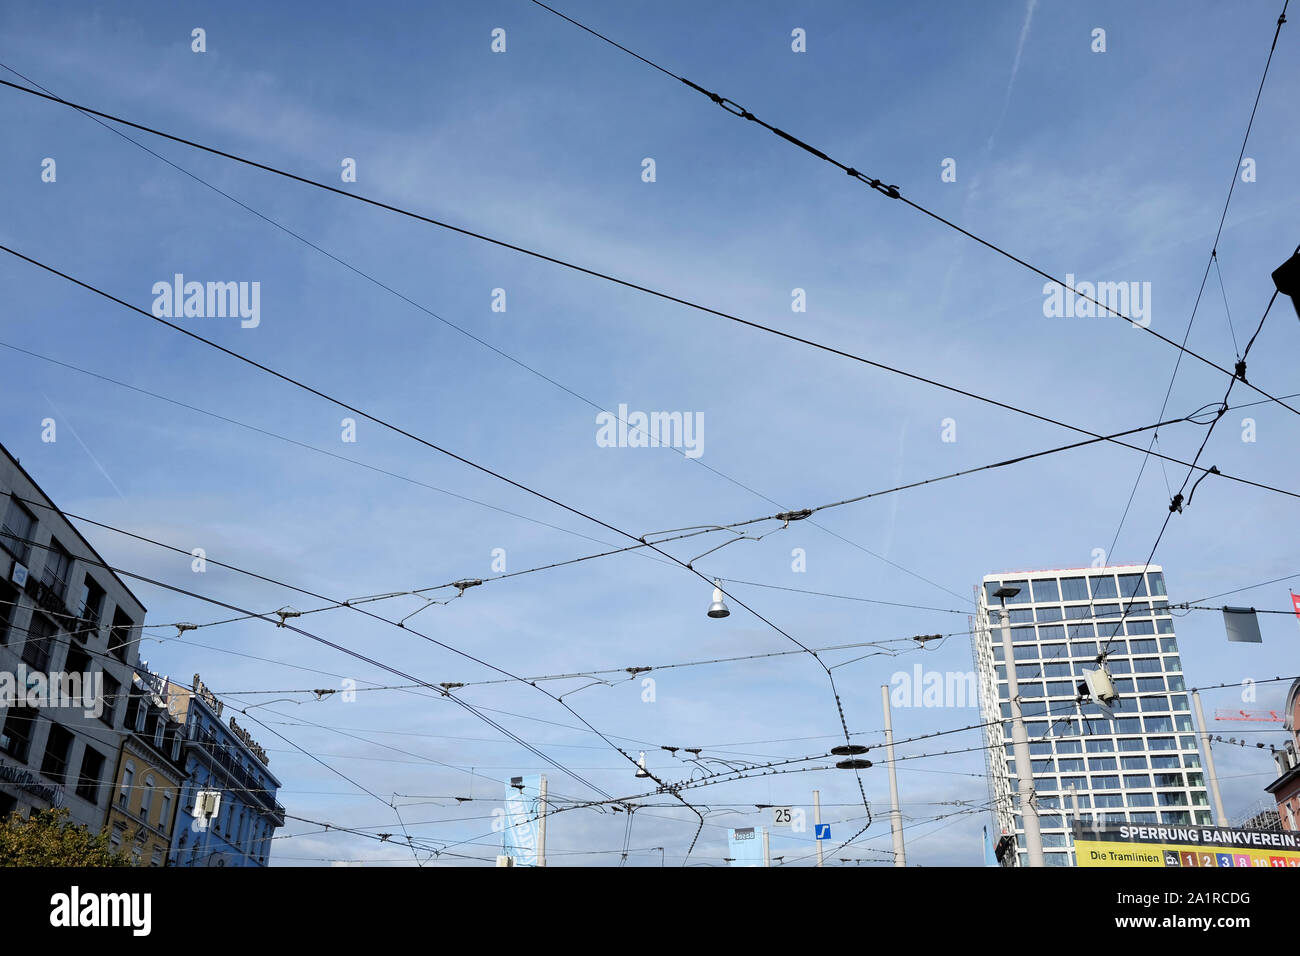 Tram wires against blue sky, Basel, Switzerland Stock Photo